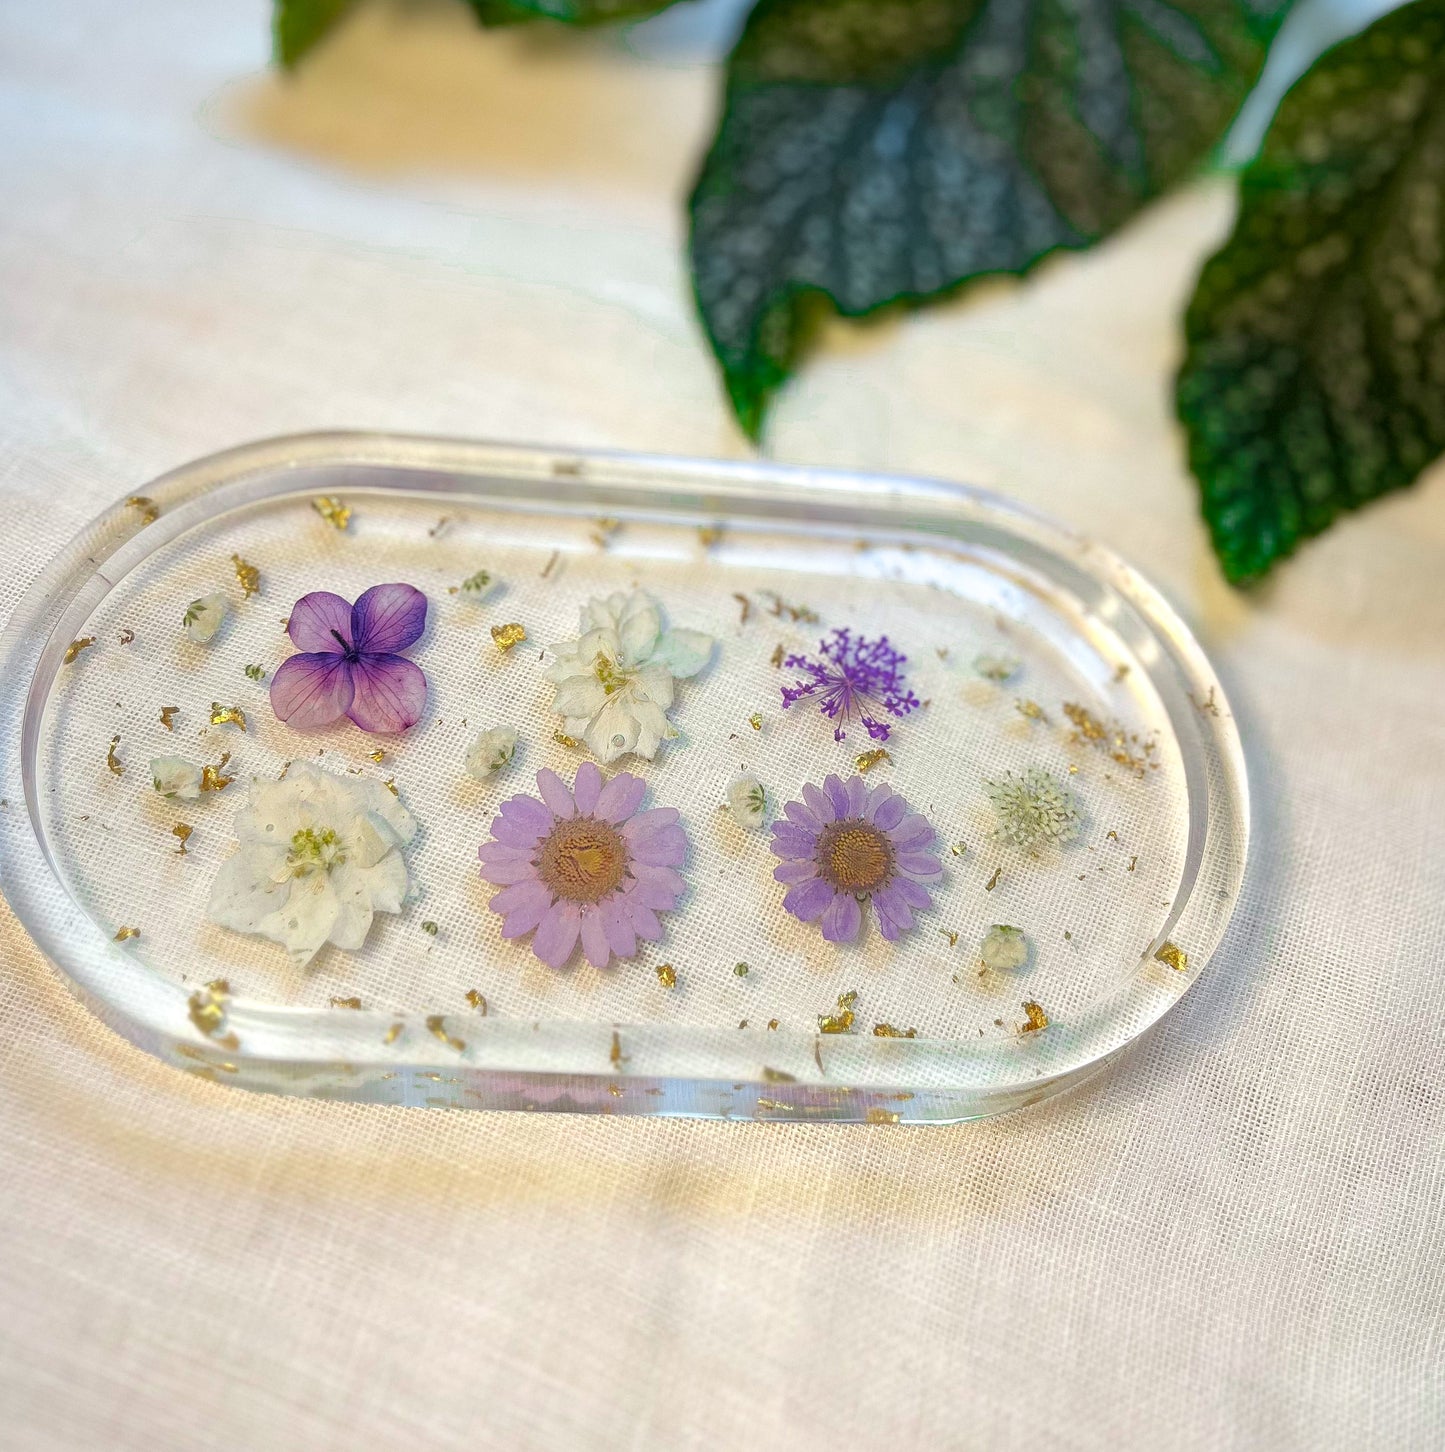 Floral Trays